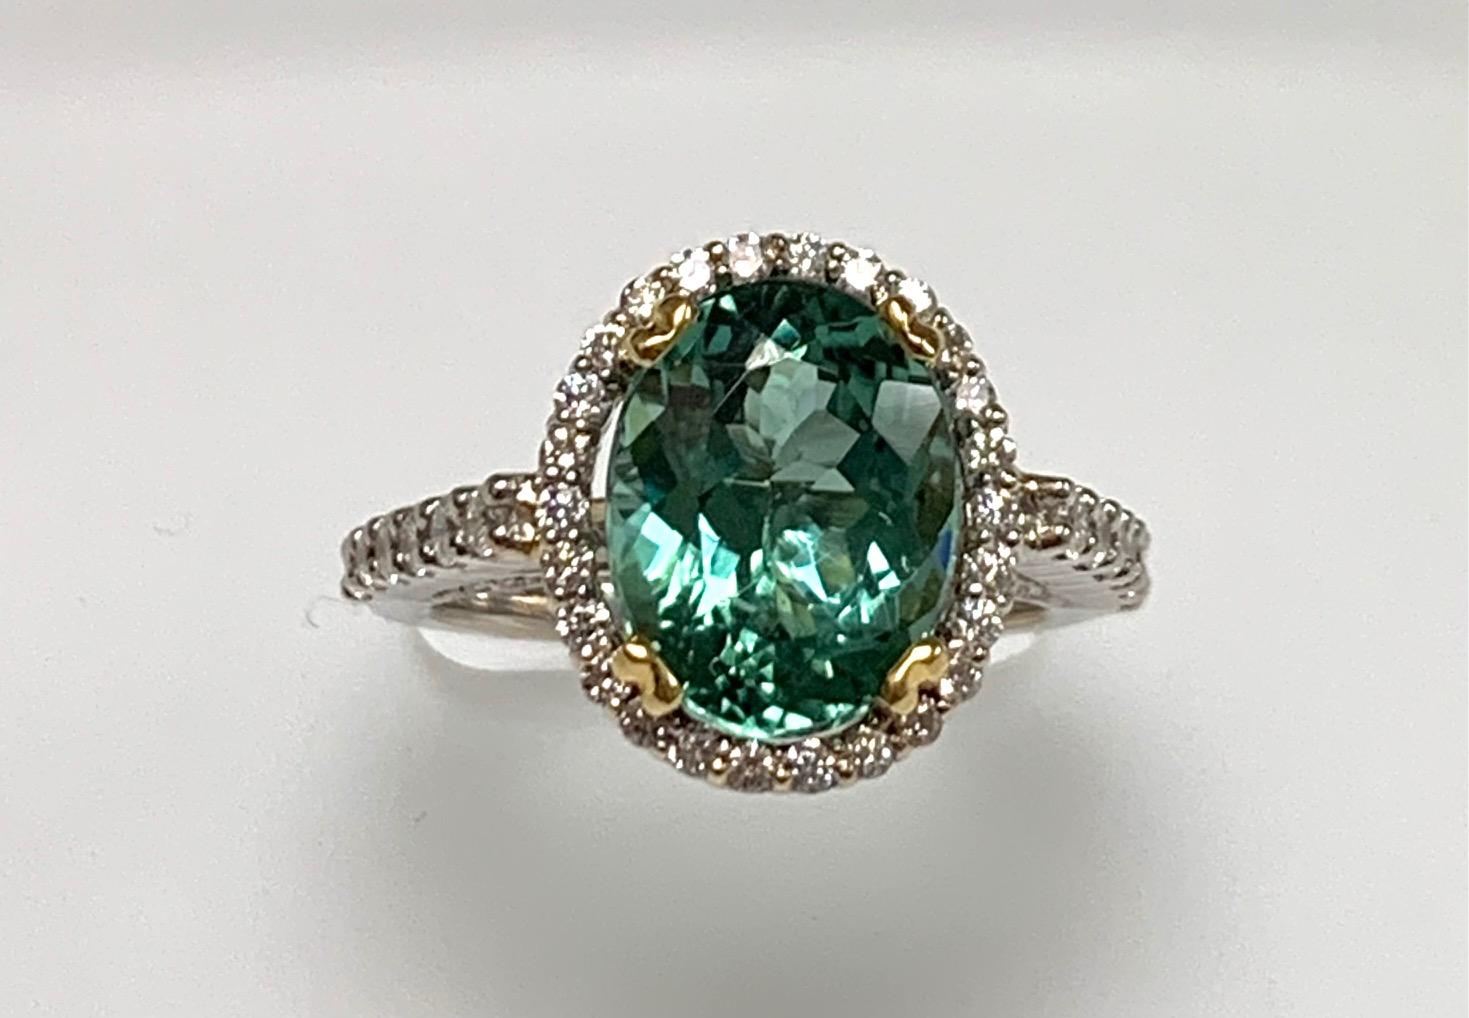 4.48 Carat green tourmaline set in 18k white gold ring along with 0.88 ct diamonds around , under the basket , and half way on the shank.yellow gold basket